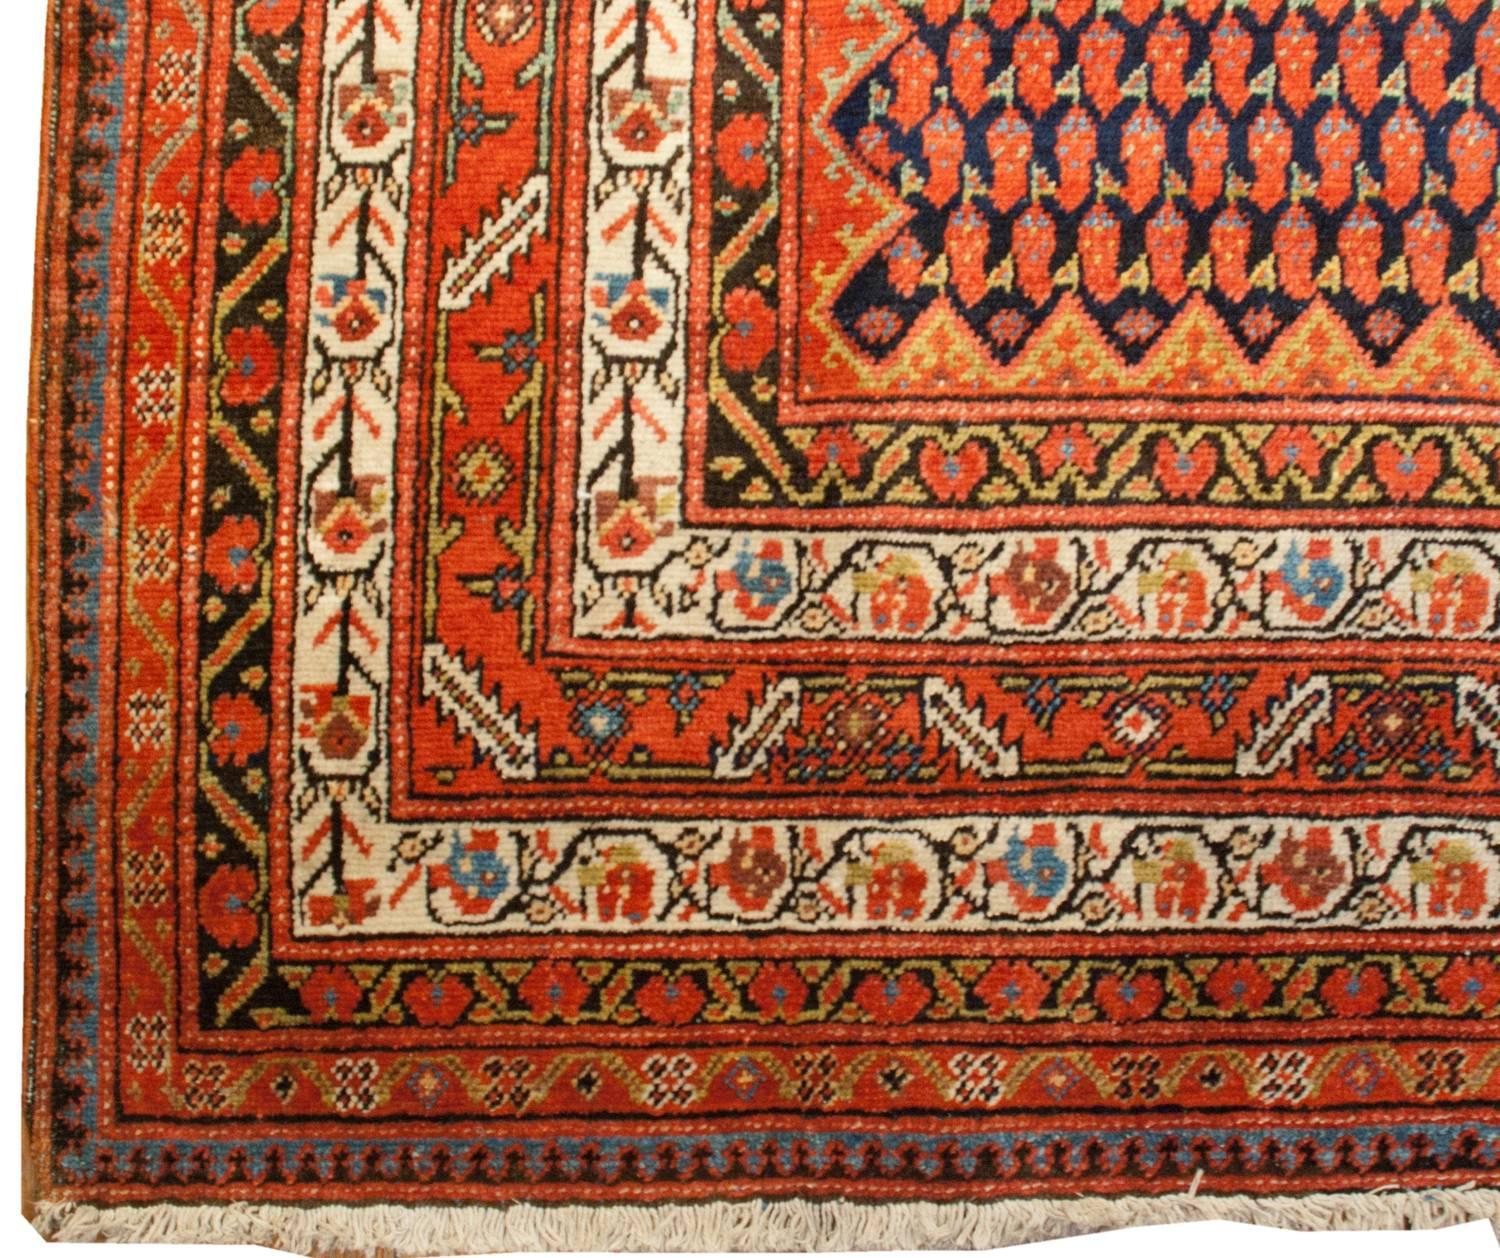 A wonderful early 20th century Persian Saraband runner with an elaborate all-over crimson and mint green paisley pattern on a dark indigo background. The border is wide, comprised of seven distinct multicolored patterns, with geometric and natural